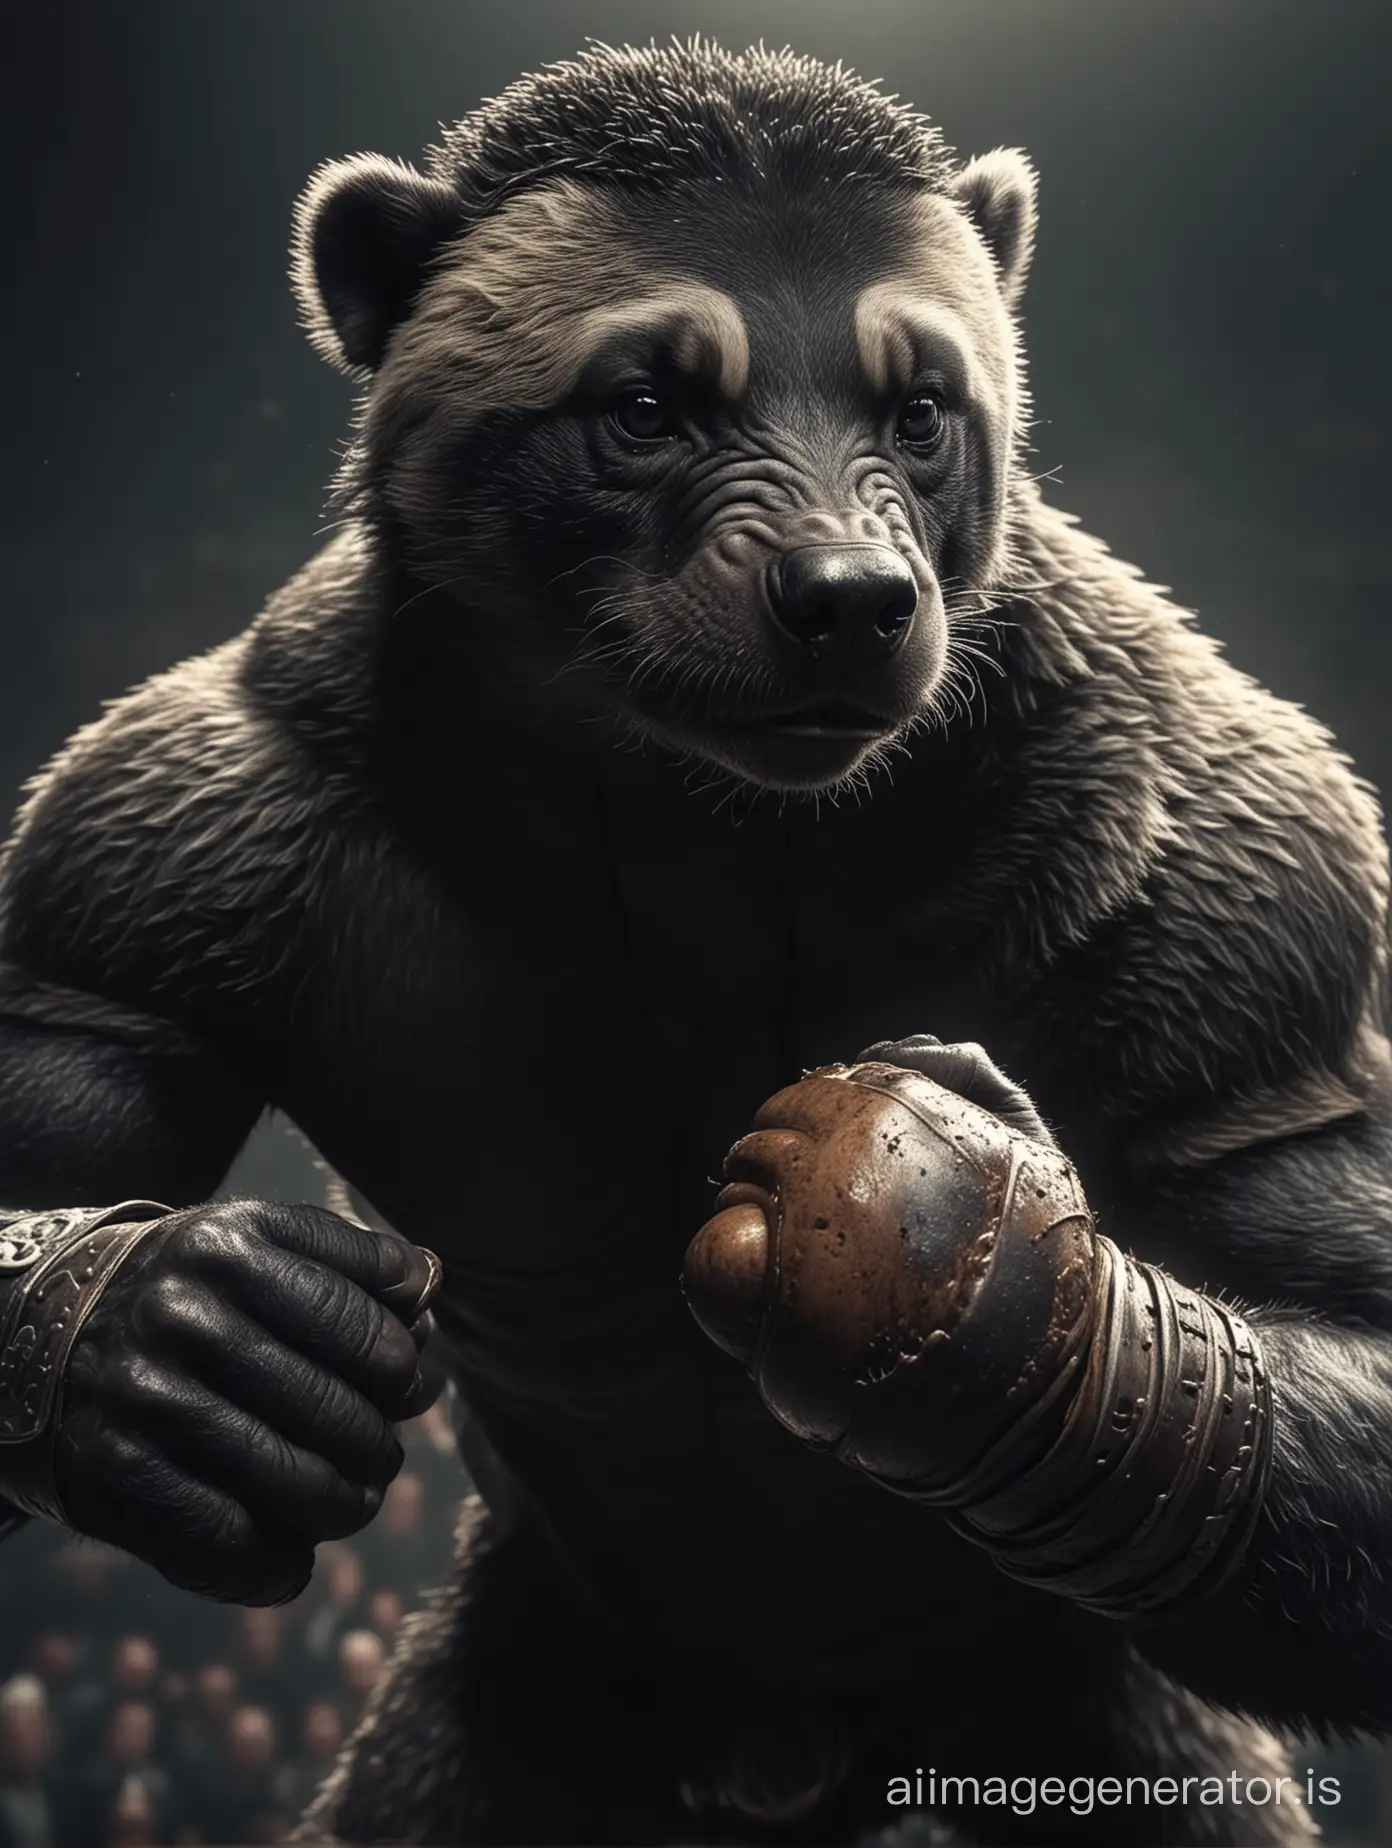 Anthropomorphic-Honey-Badger-Boxer-Delivers-Powerful-Punch-in-Fantasy-Ring-Fight